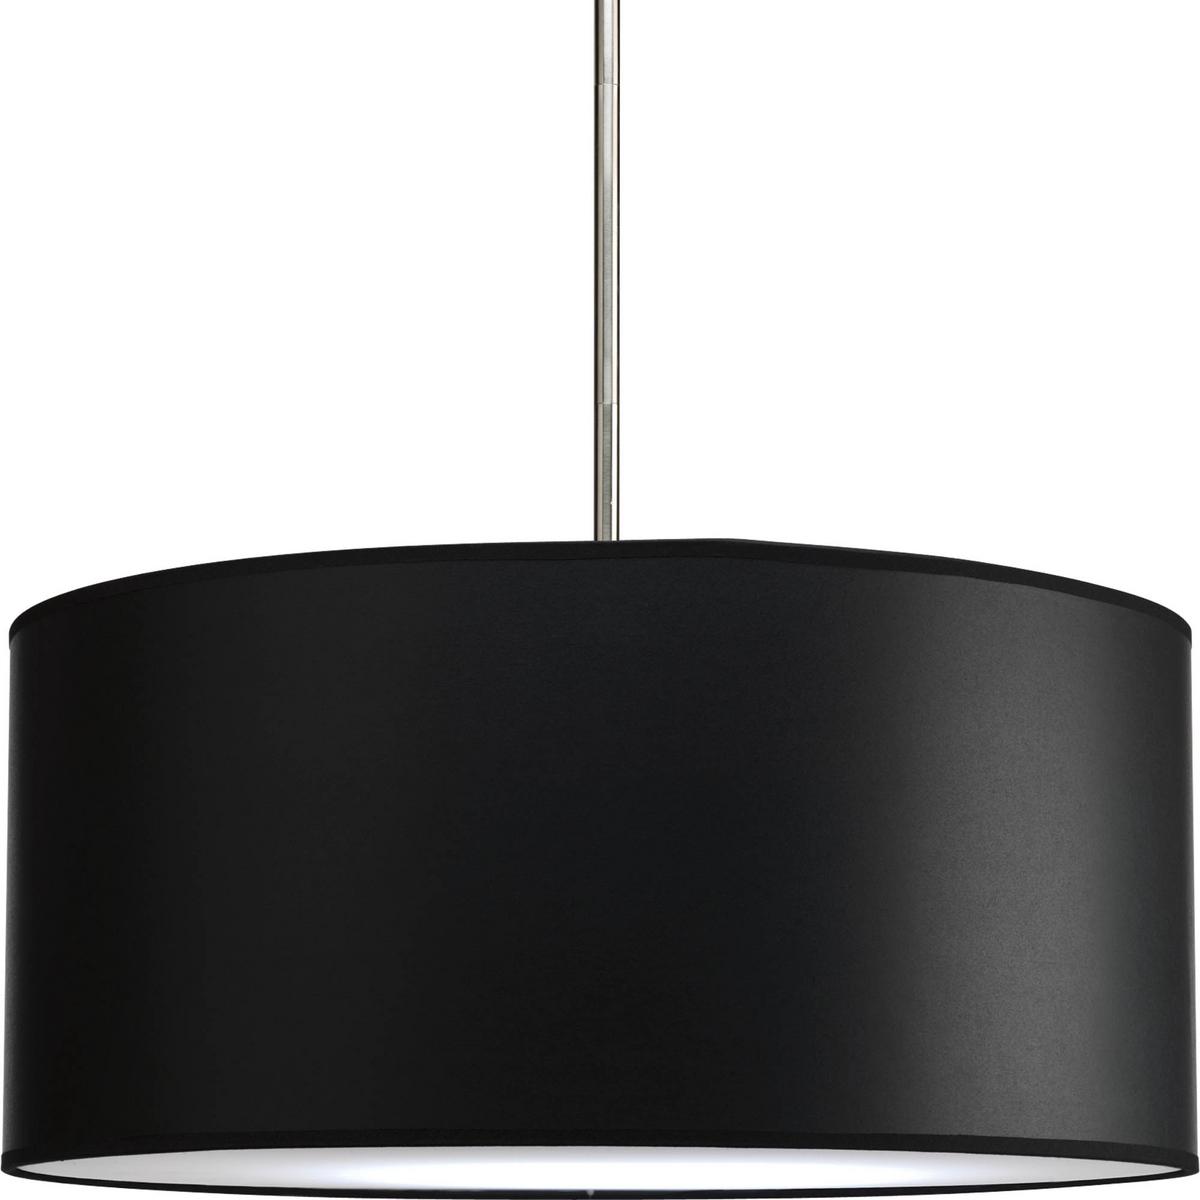 Hubbell P8824-01 The Markor Series is a modular pendant system. The versatile series allow the choice of shades and stem kits. This 22" shade with Black Parchment Paper is inspired by mid-century design. Acrylic bottom diffuser. This shade can be used with a variety of st